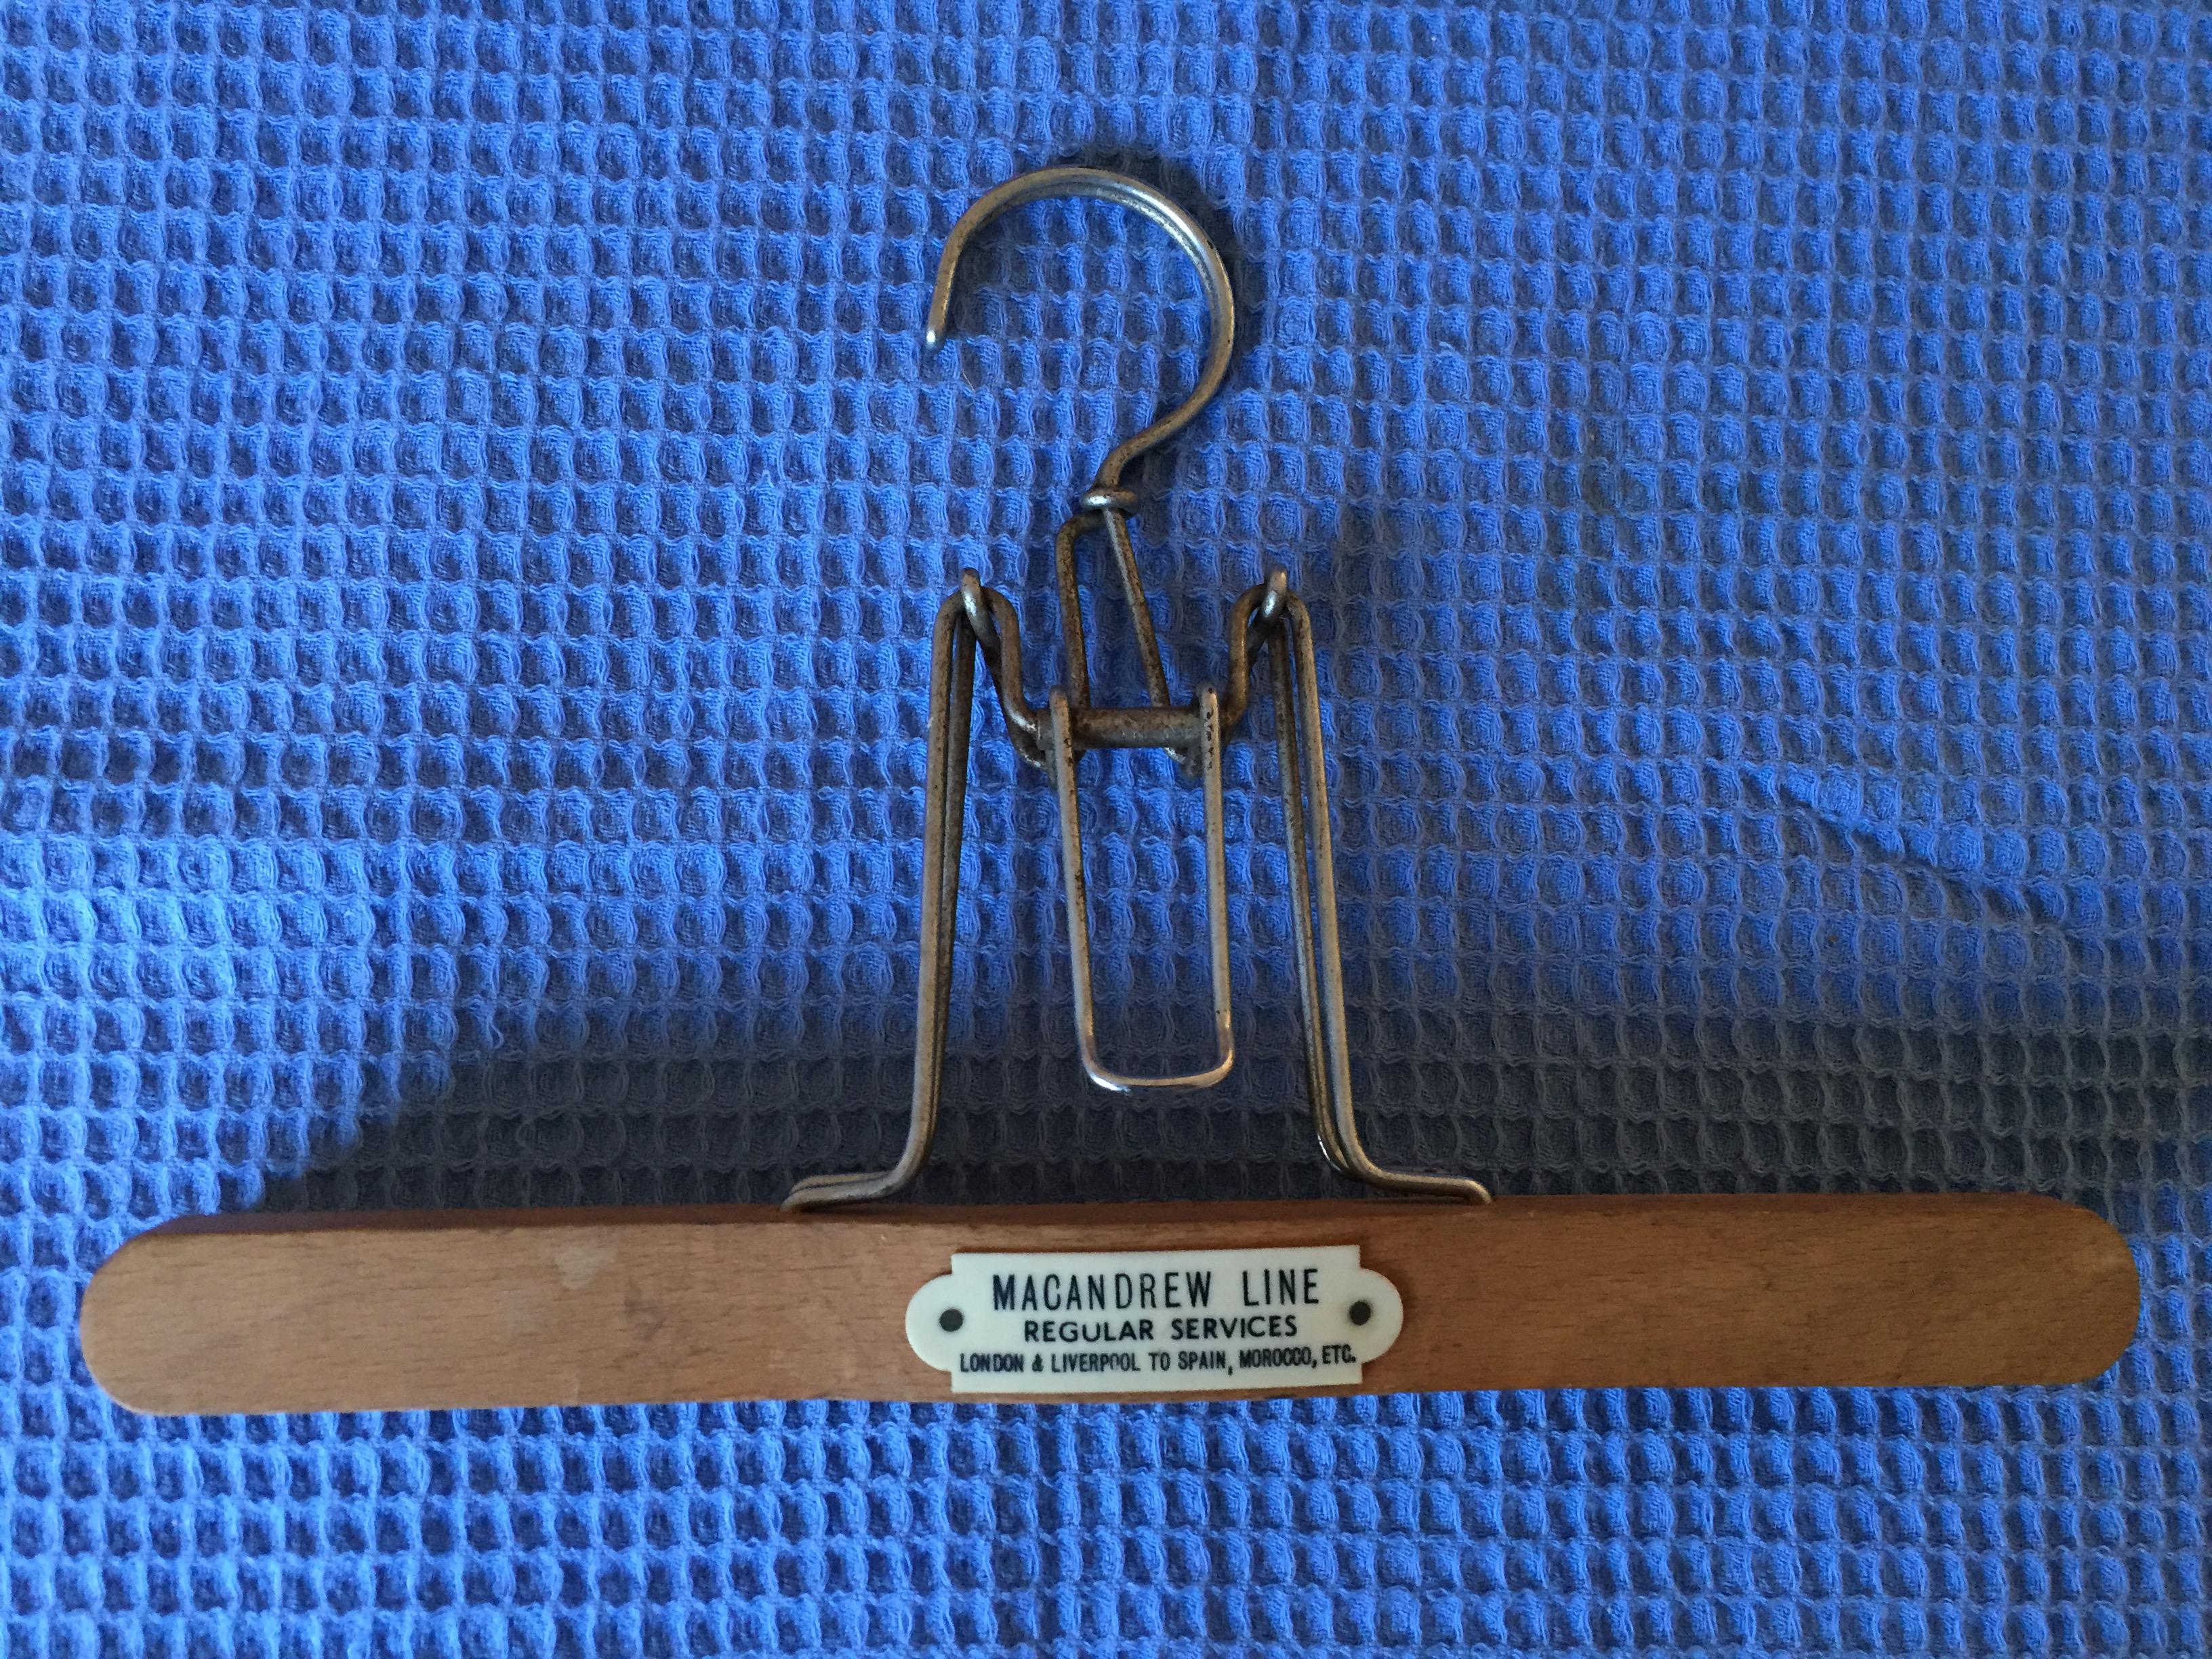 AS USED IN SERVICE COAT HANGER FROM THE MACANDREW LINE